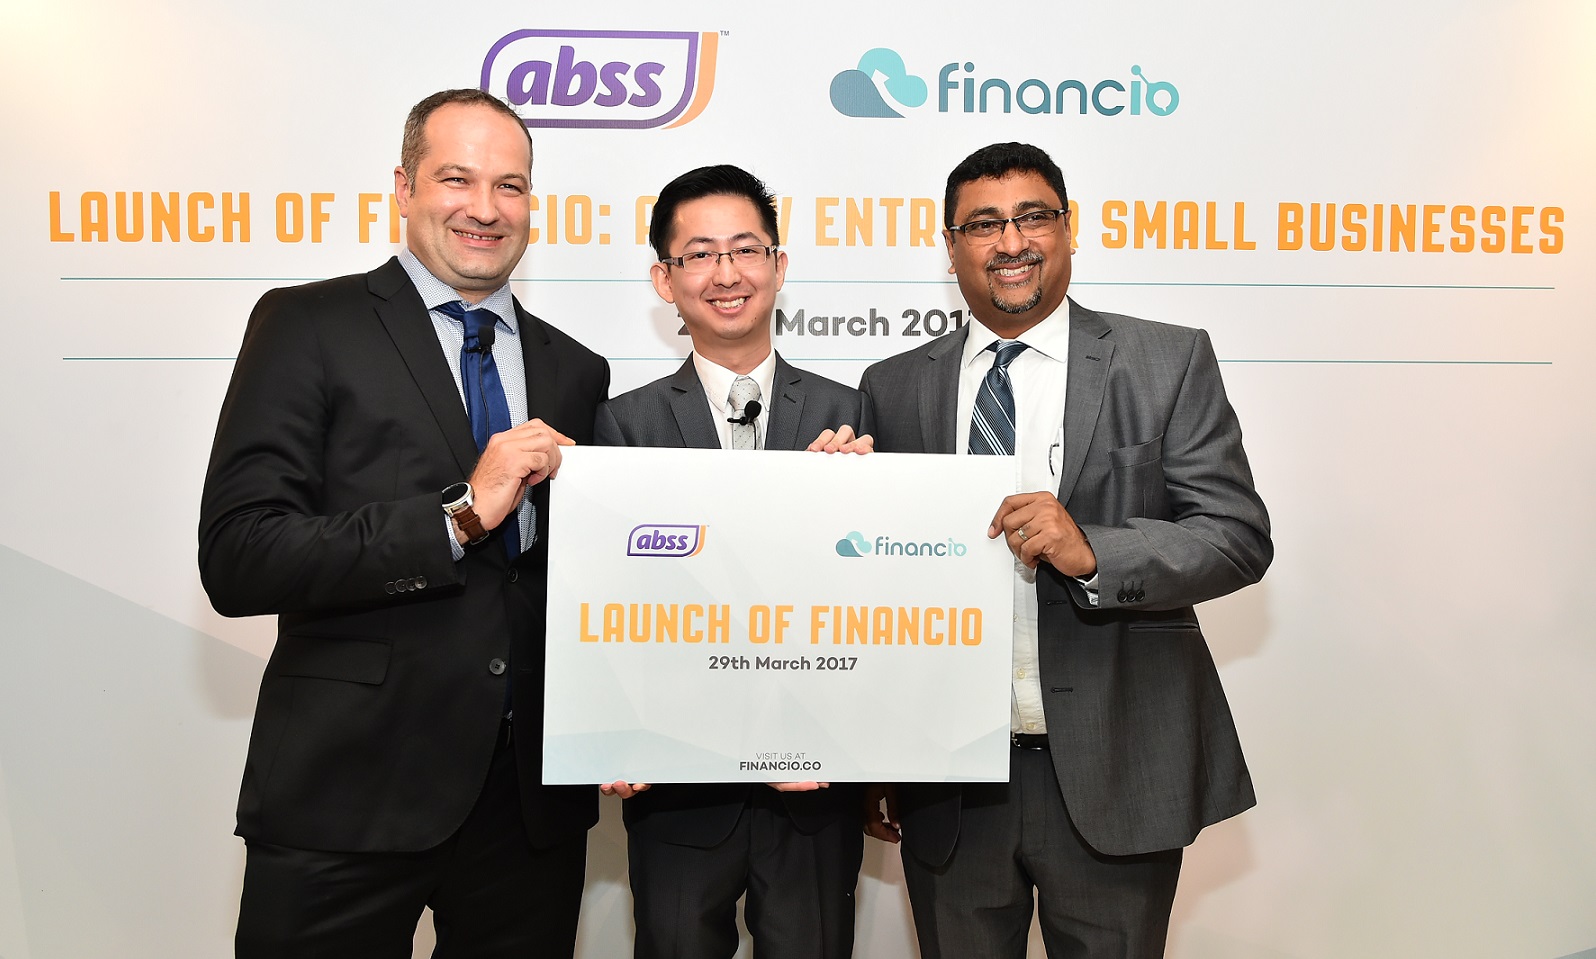 ABSS’ Financio comes to the aid of startups, SMEs